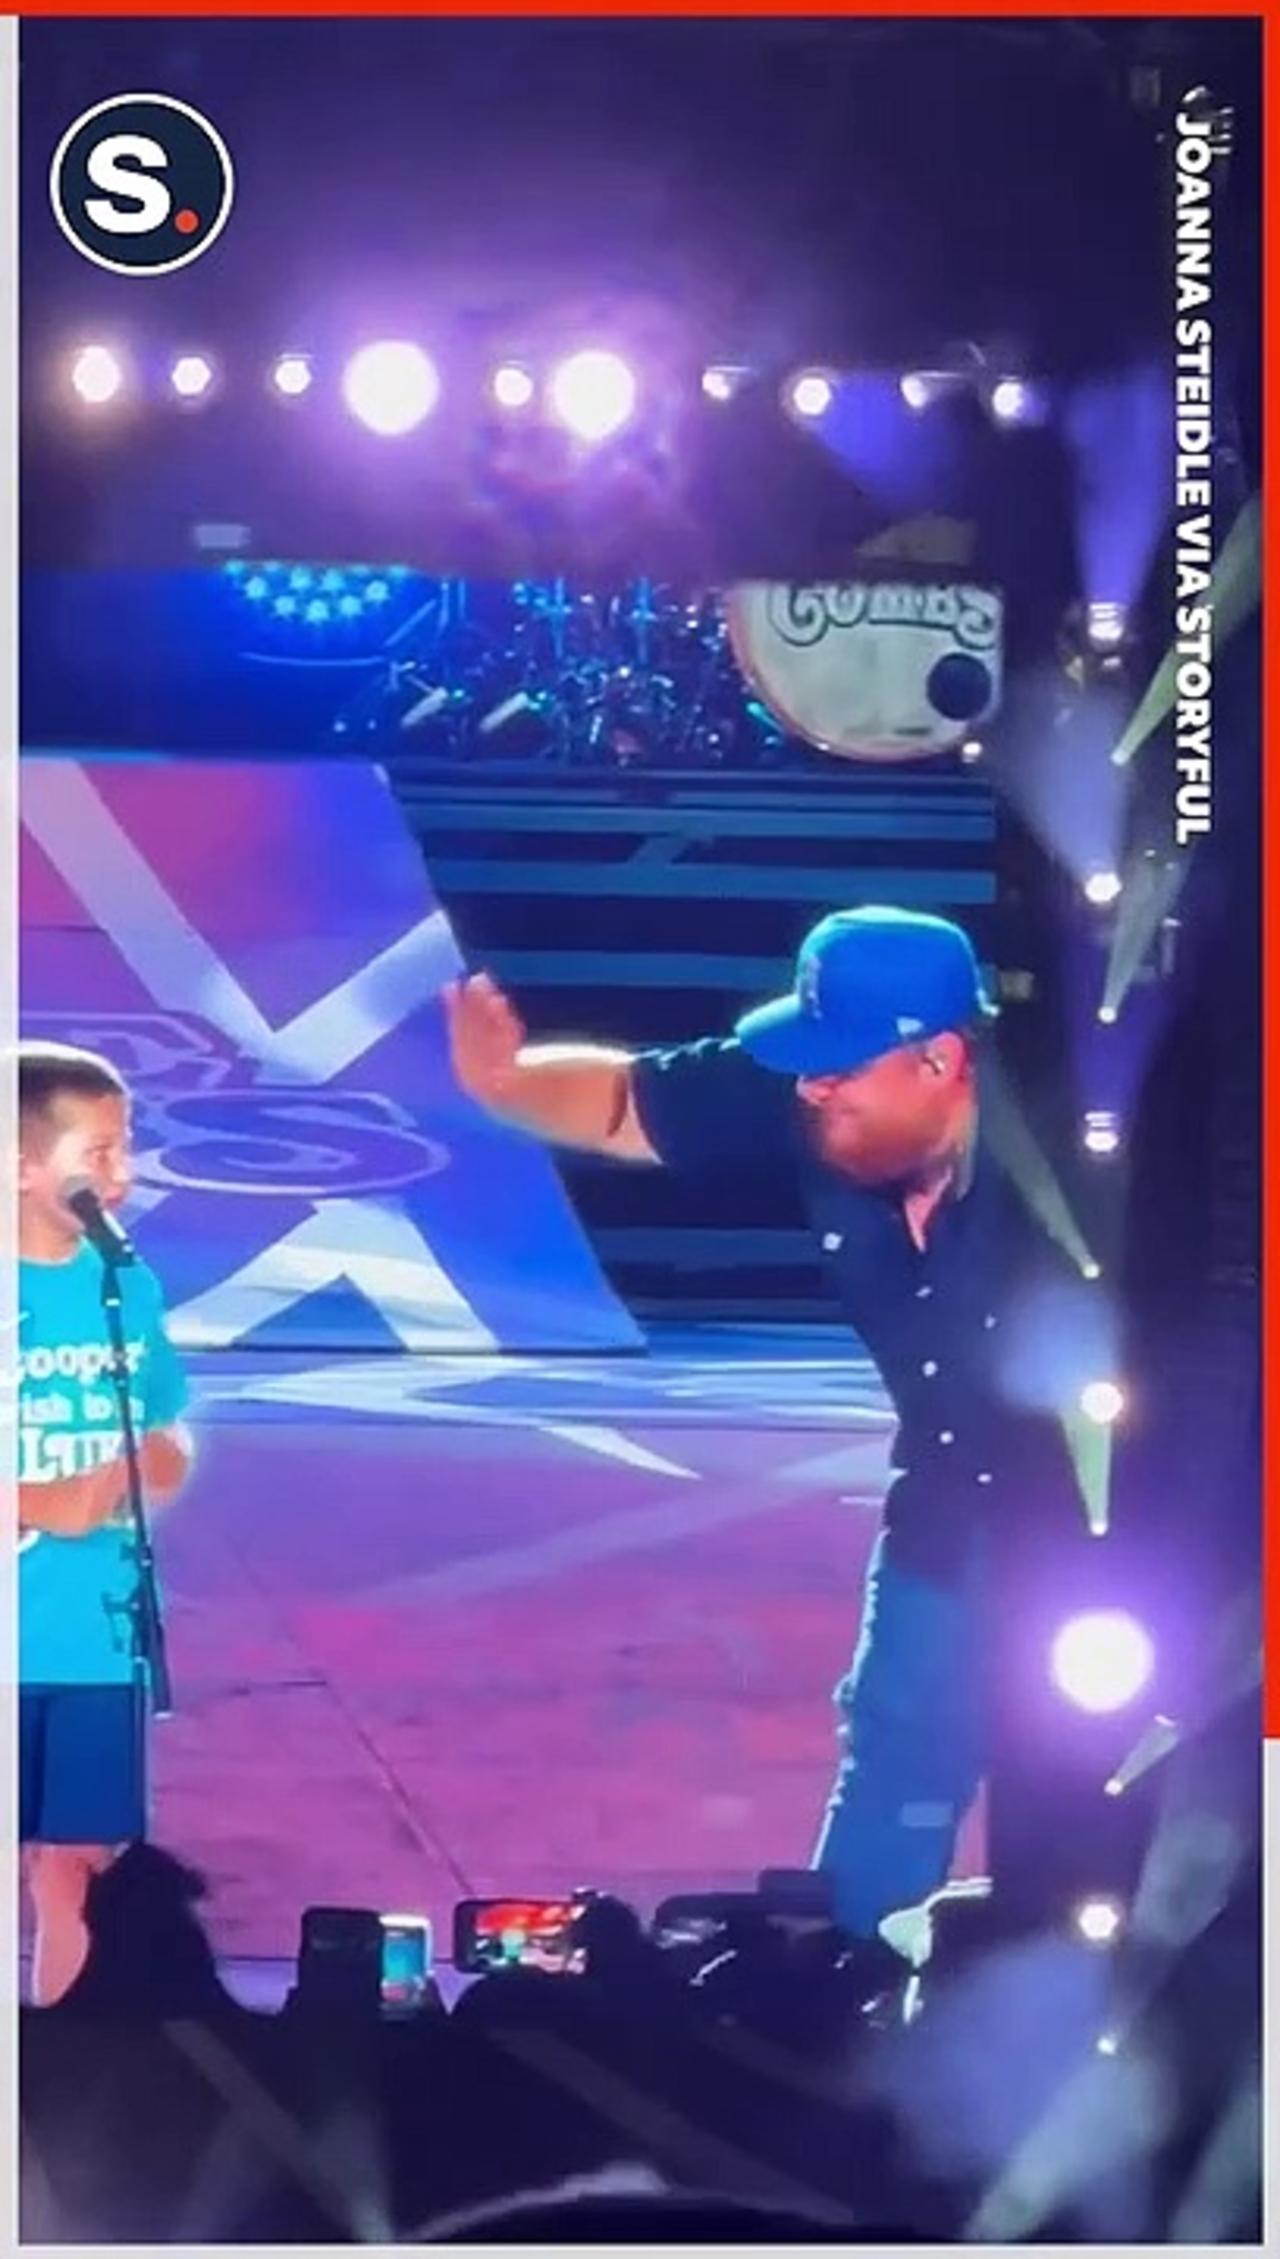 Boy Who Fought Leukemia Gets Wish Granted as Luke Combs Invites Him on Stage